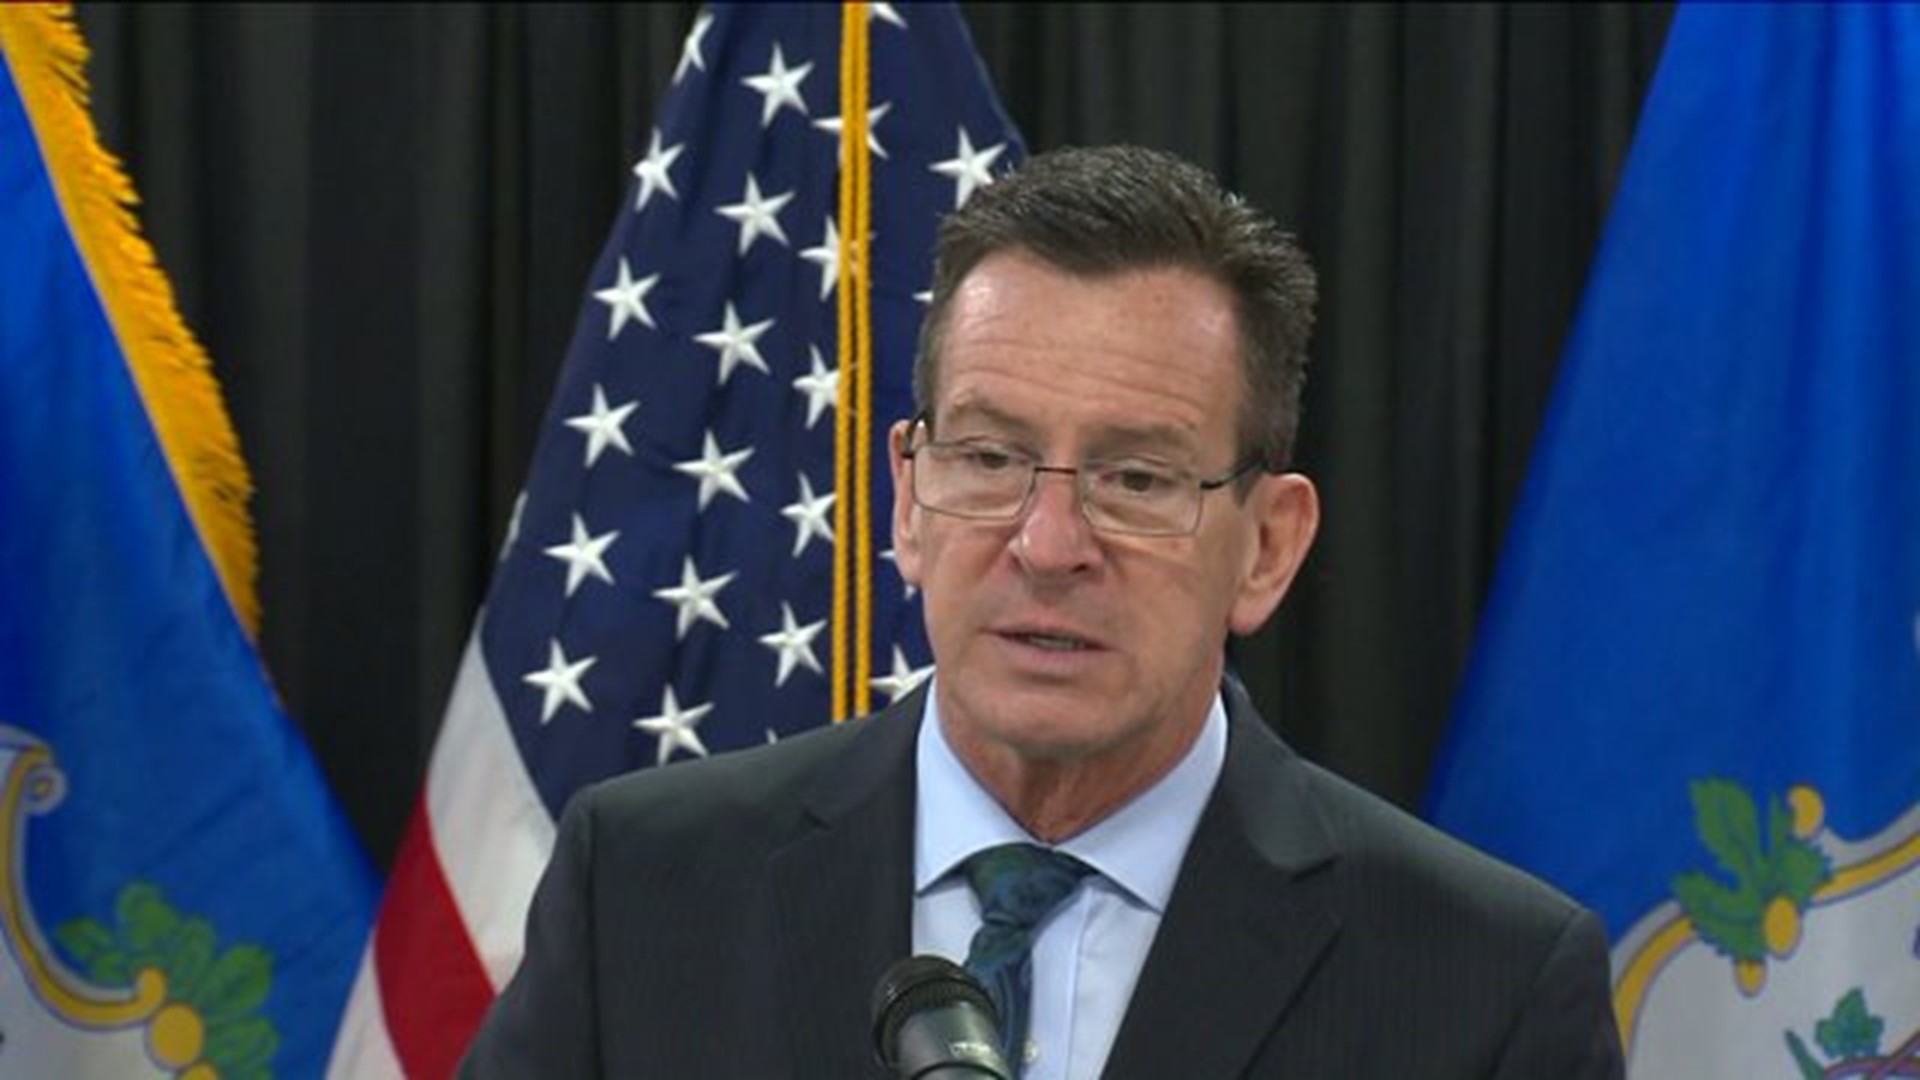 Gov. Malloy discusses invite to State of the Union